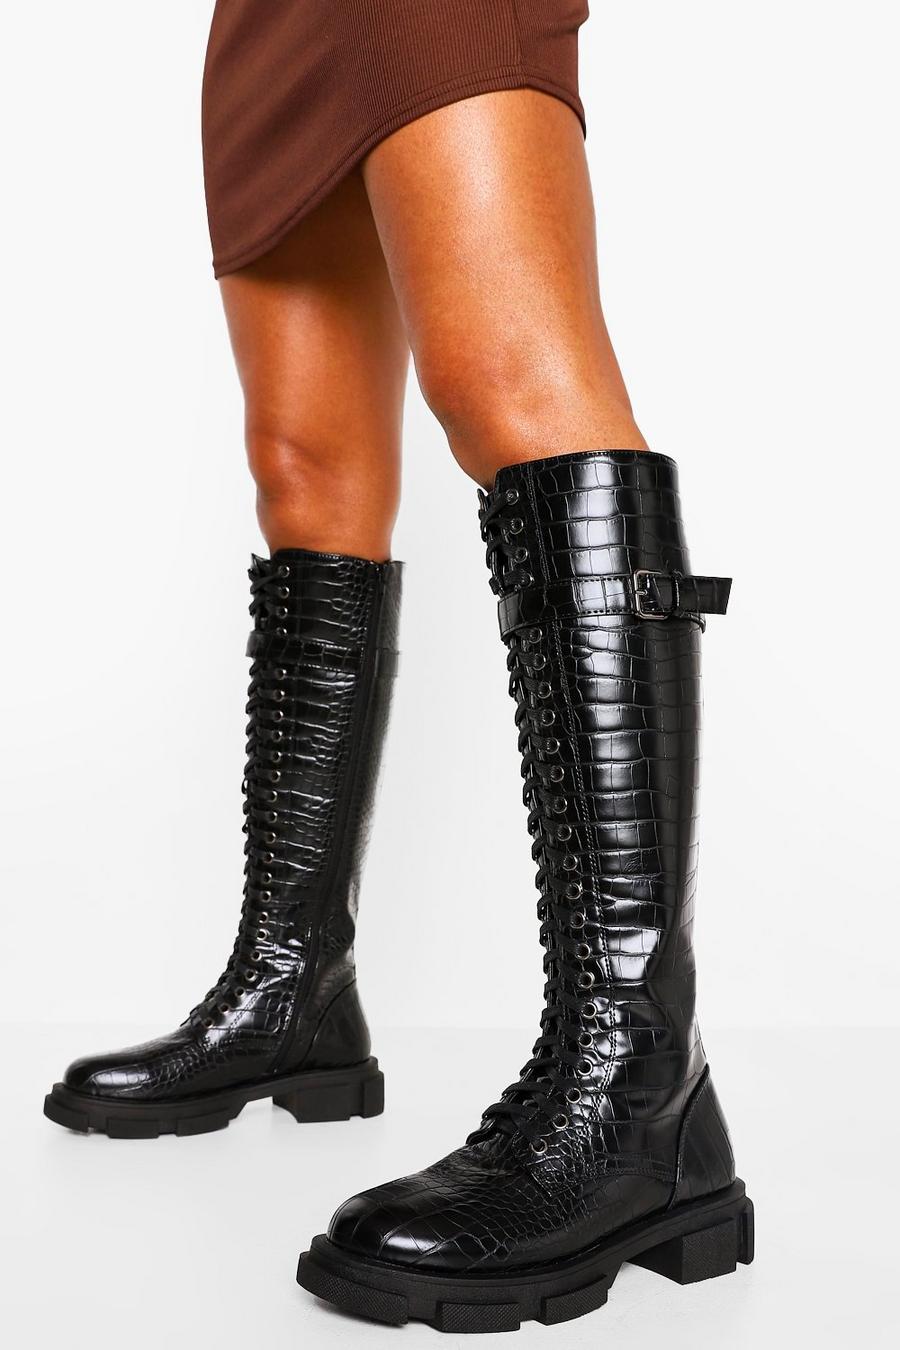 Black Croc Lace Up Buckle Knee High Combat Boots image number 1